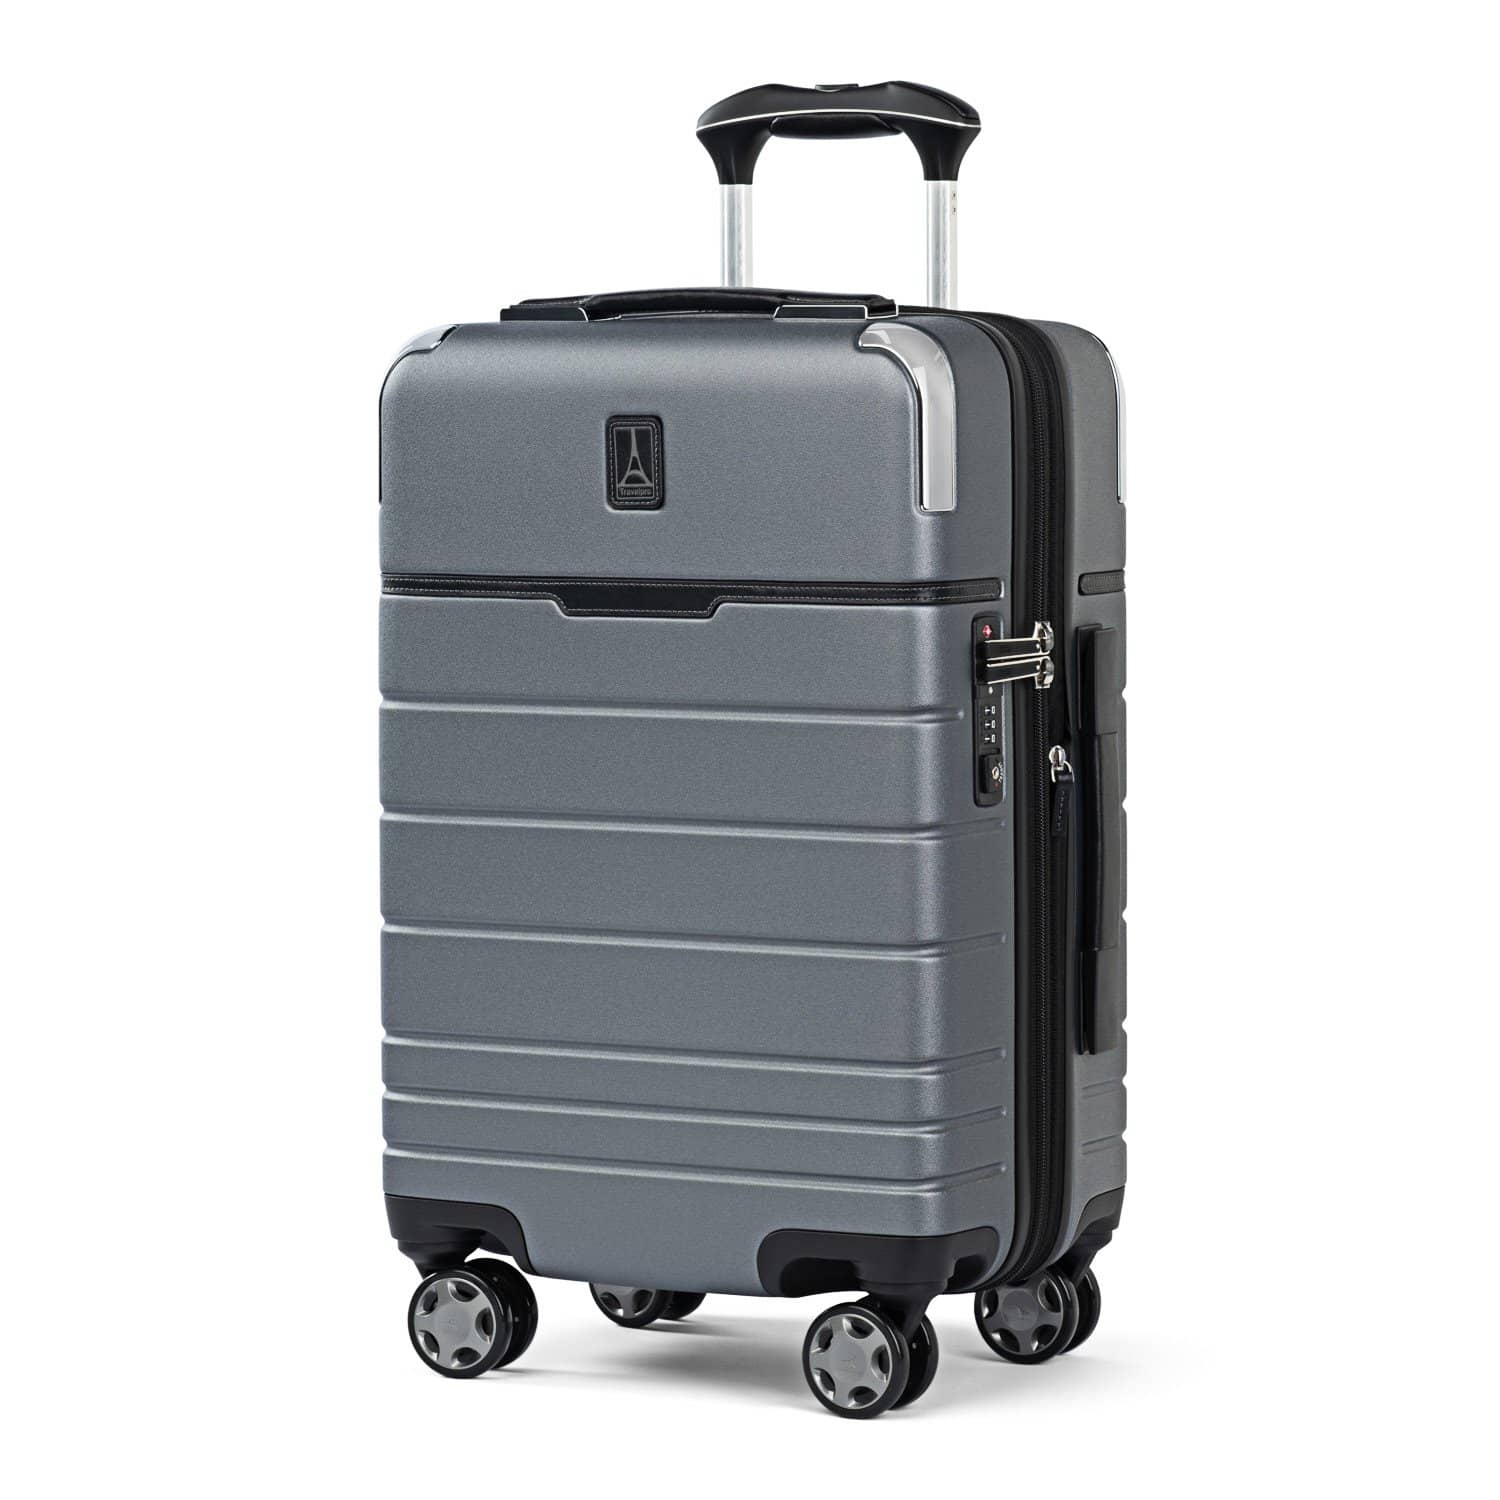 Shop Travel & Luggage, Duffles, Carry-On, & More